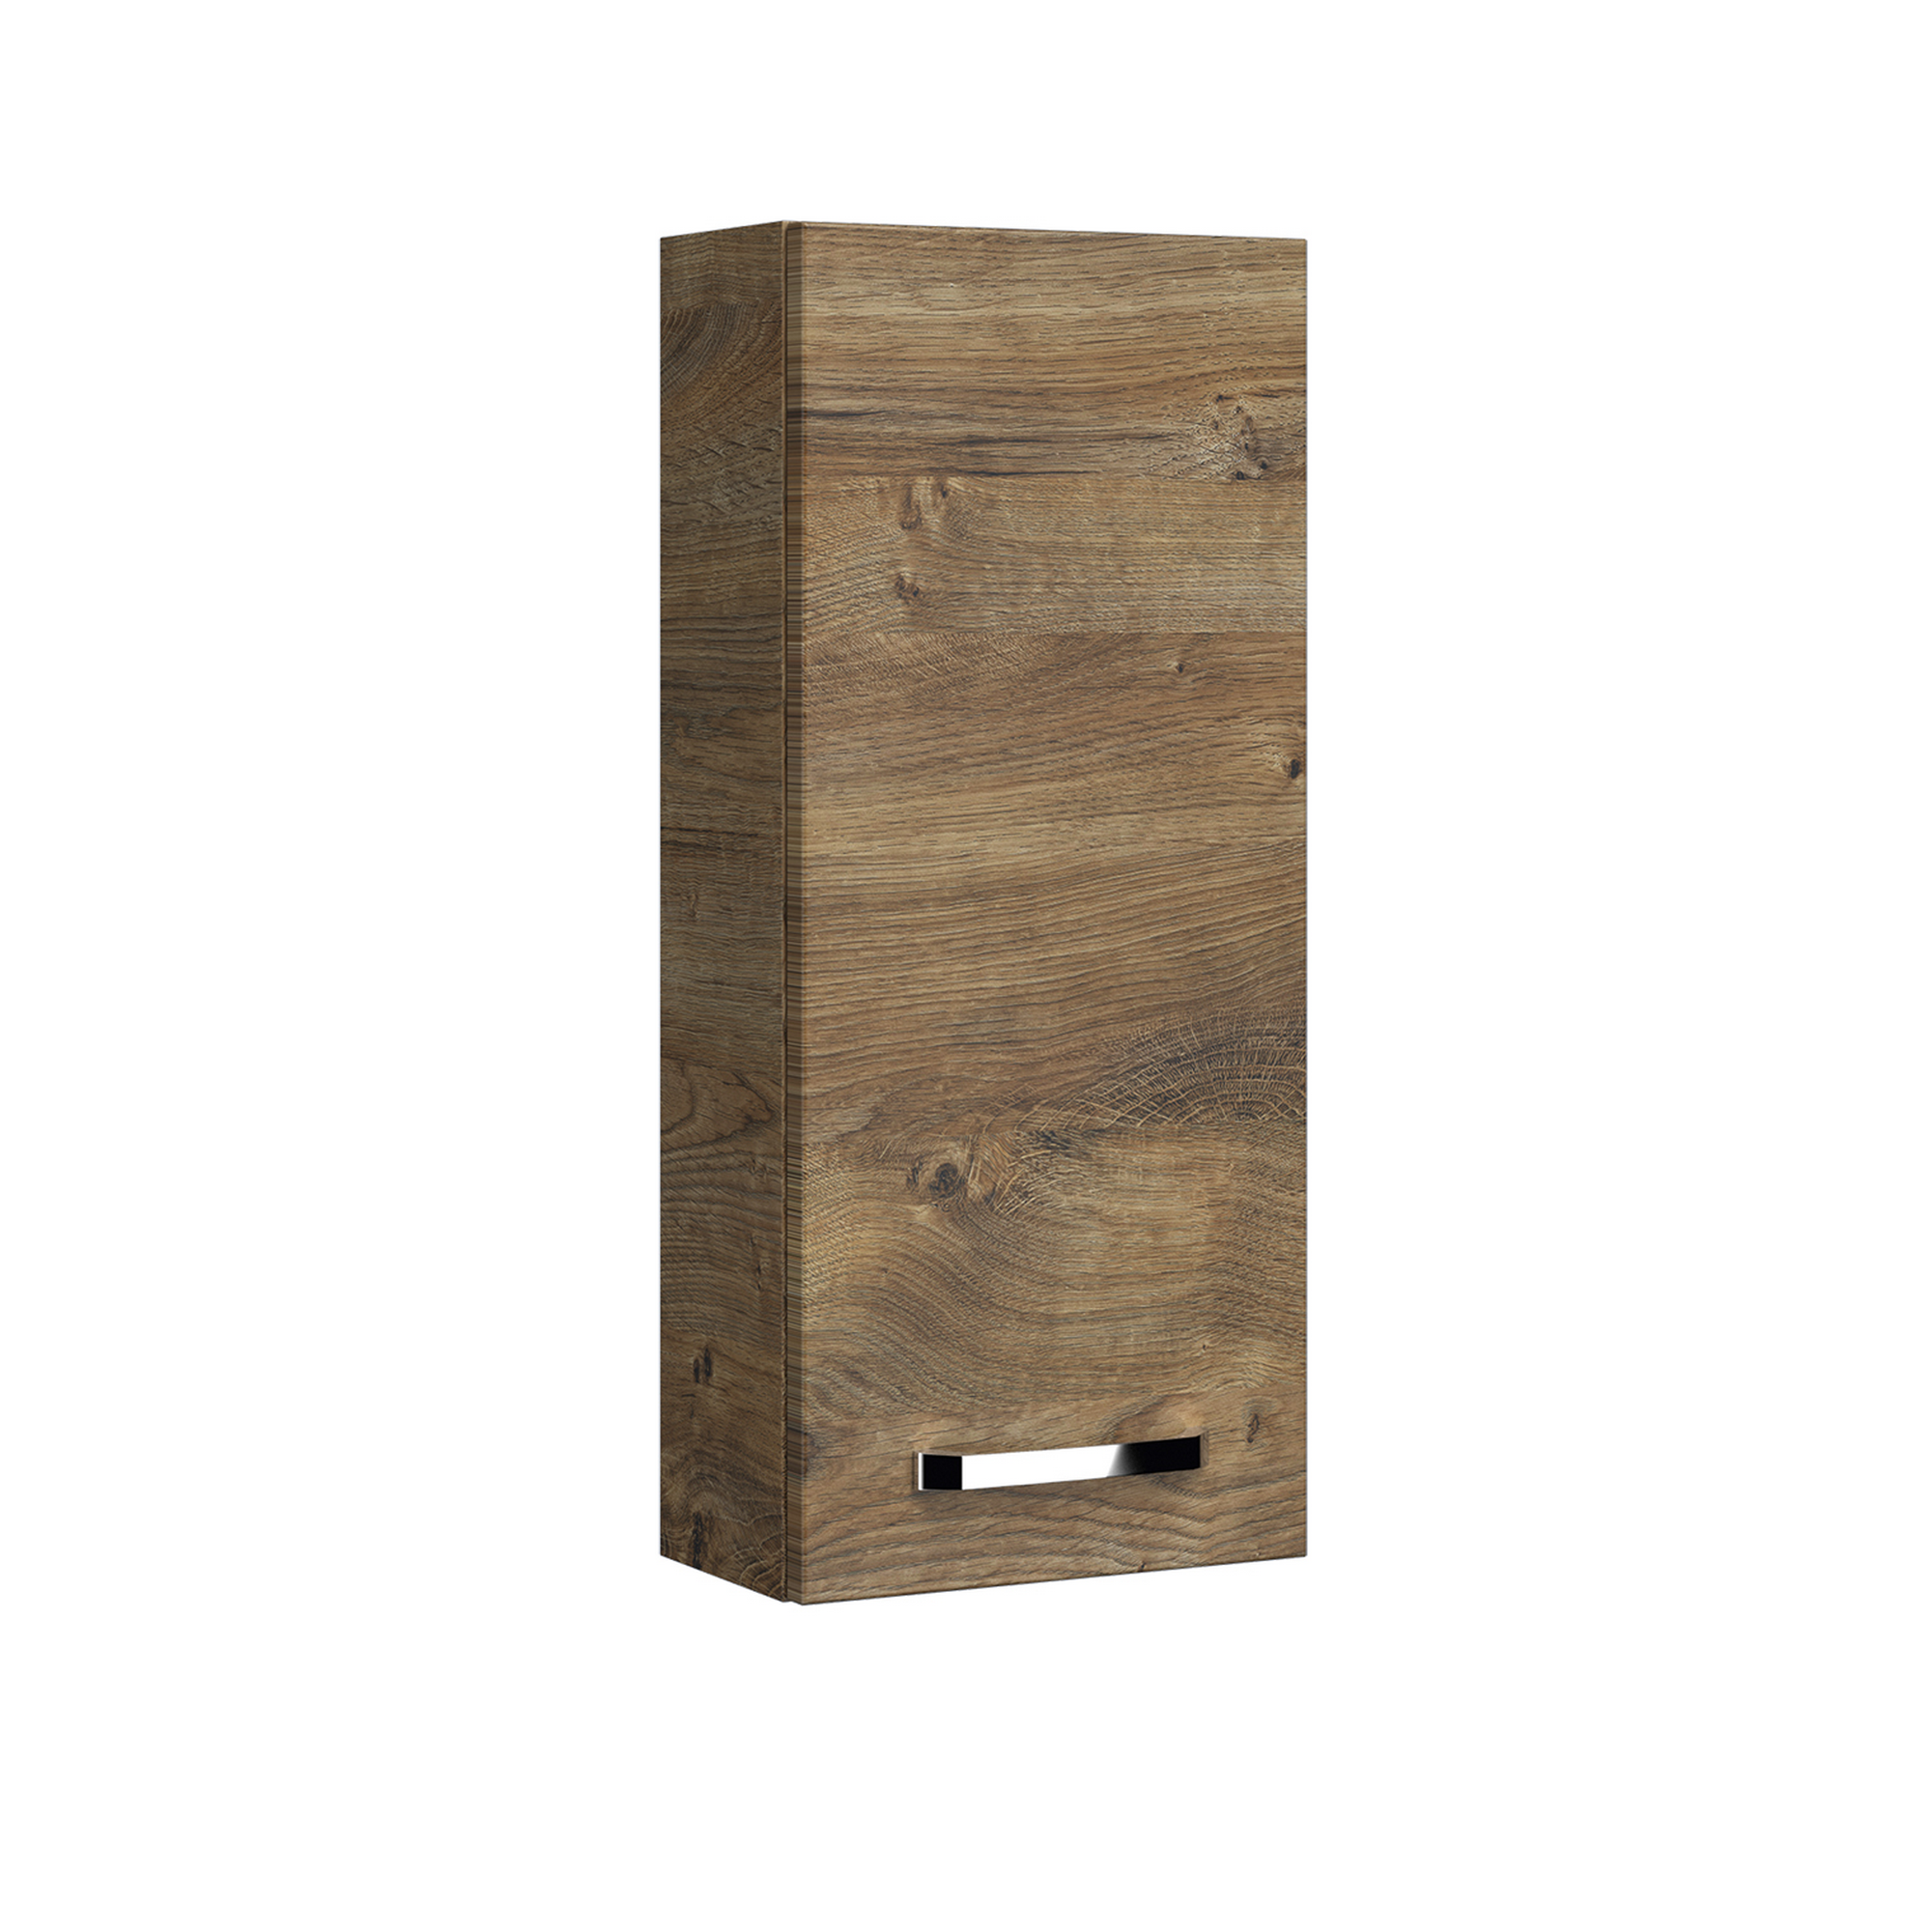 Wandschrank 'Bahamas' Eiche Ribbeck 30 x 70 x 17 cm + product picture